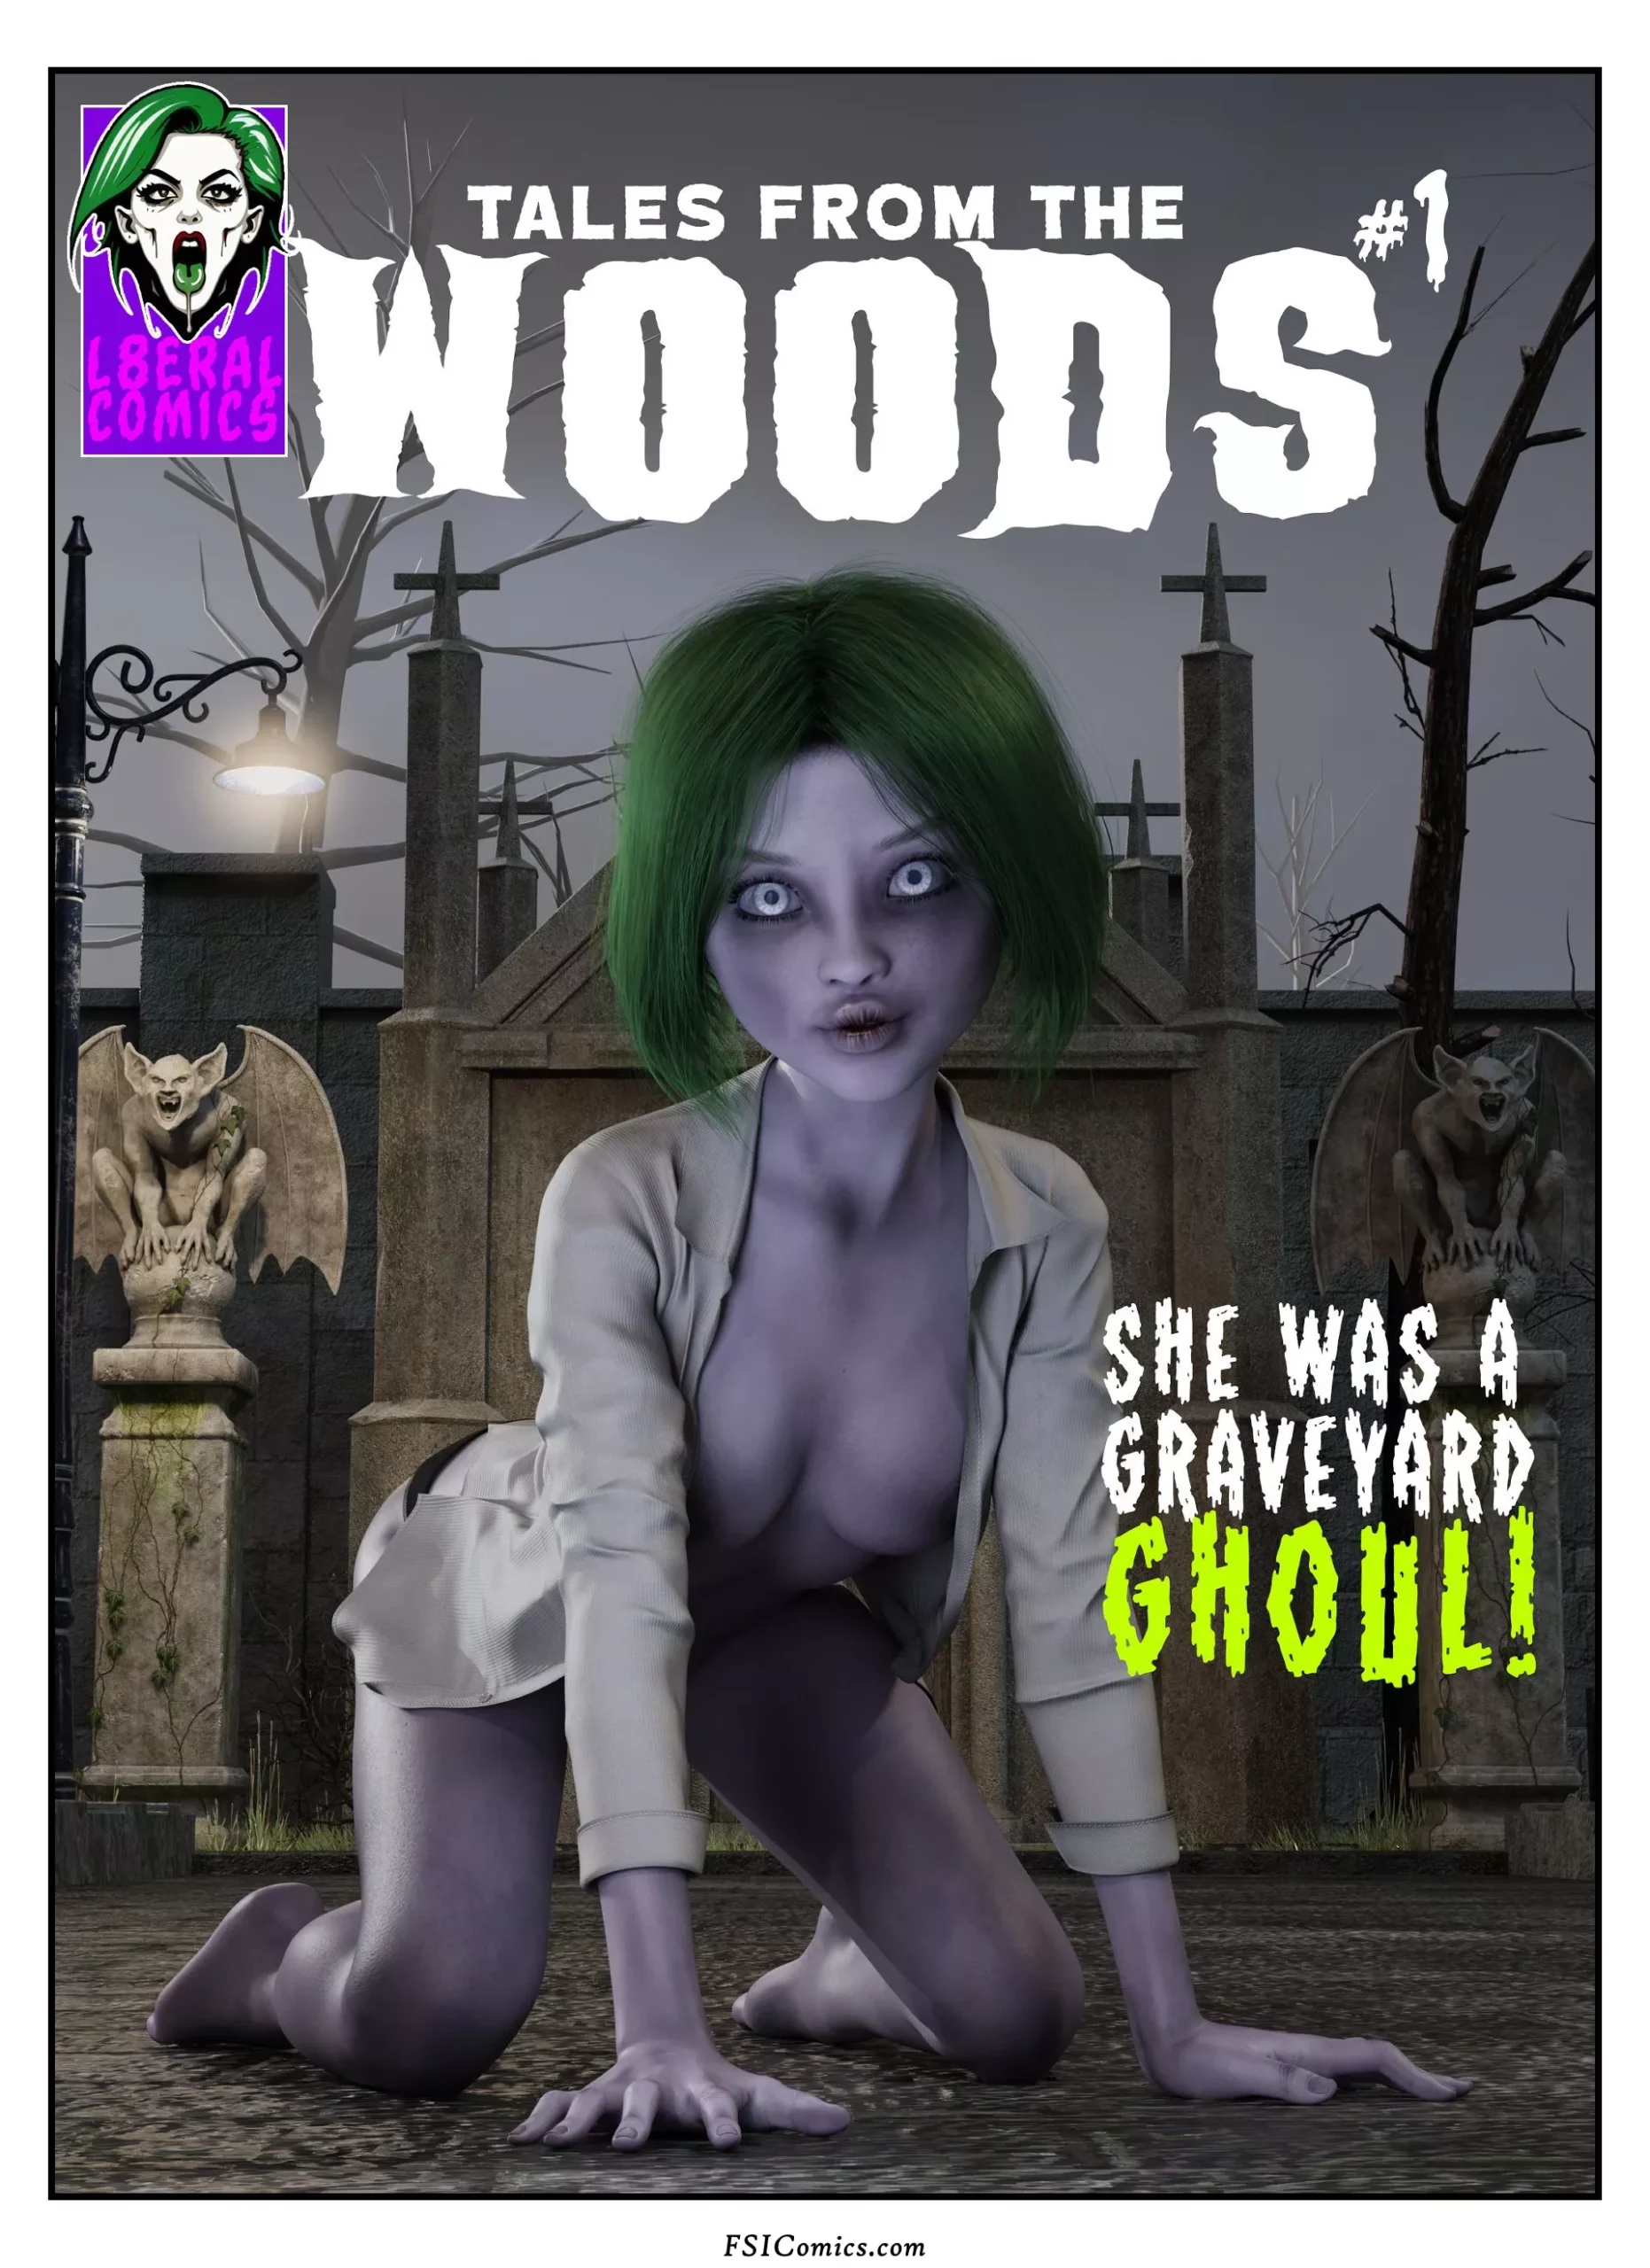 Graveyard Ghoul - Tales From The Woods - L8ERAL - 19 - FSIComics